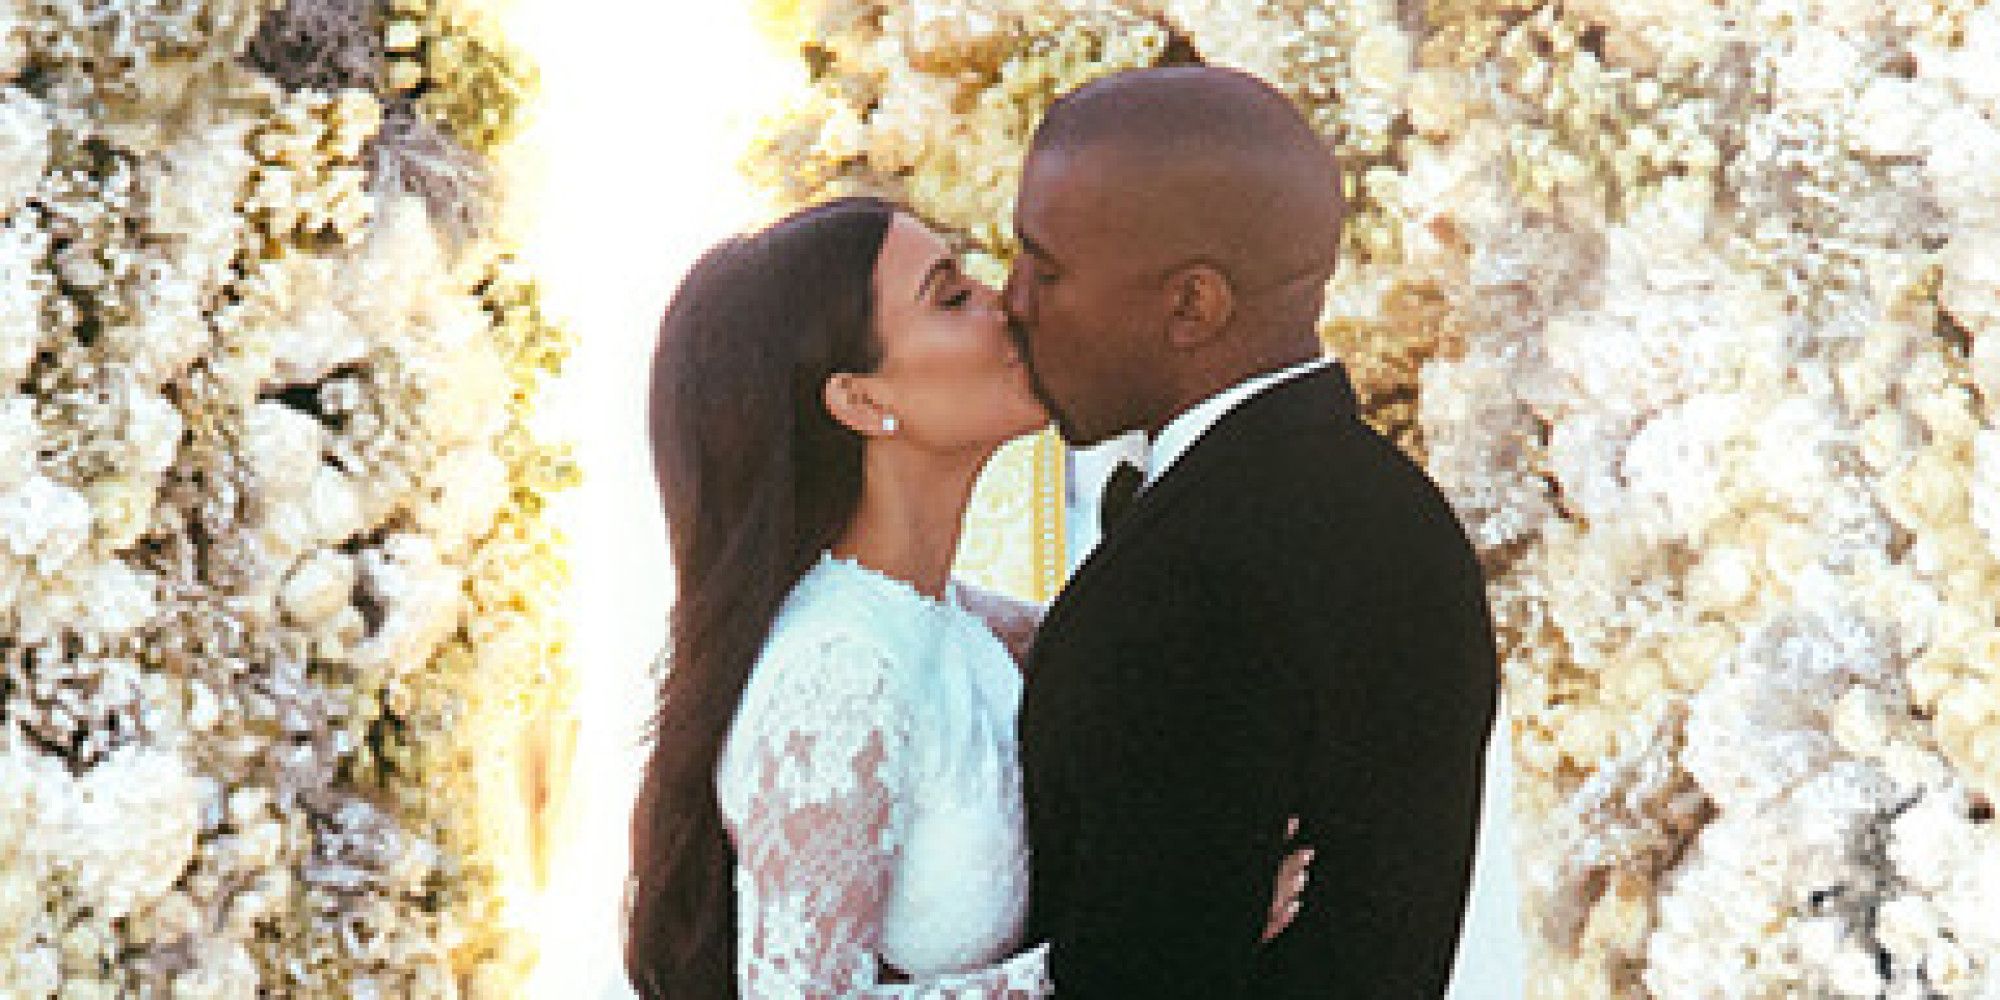 The Top 10 Celebrity Wedding Moments From 2014 HuffPost